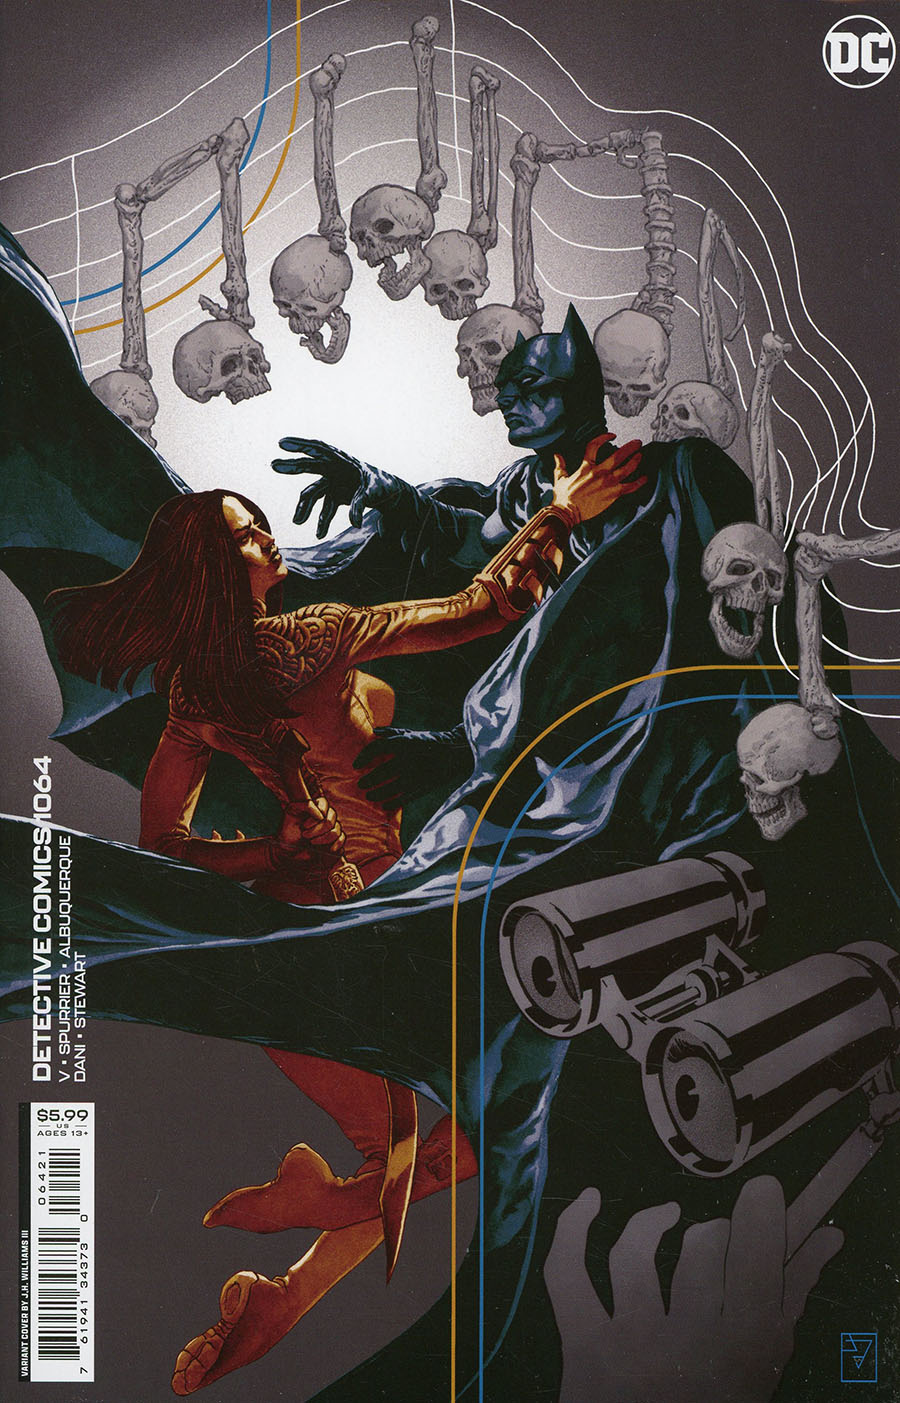 Detective Comics Vol 2 #1064 Cover B Variant JH Williams III Card Stock Variant Cover